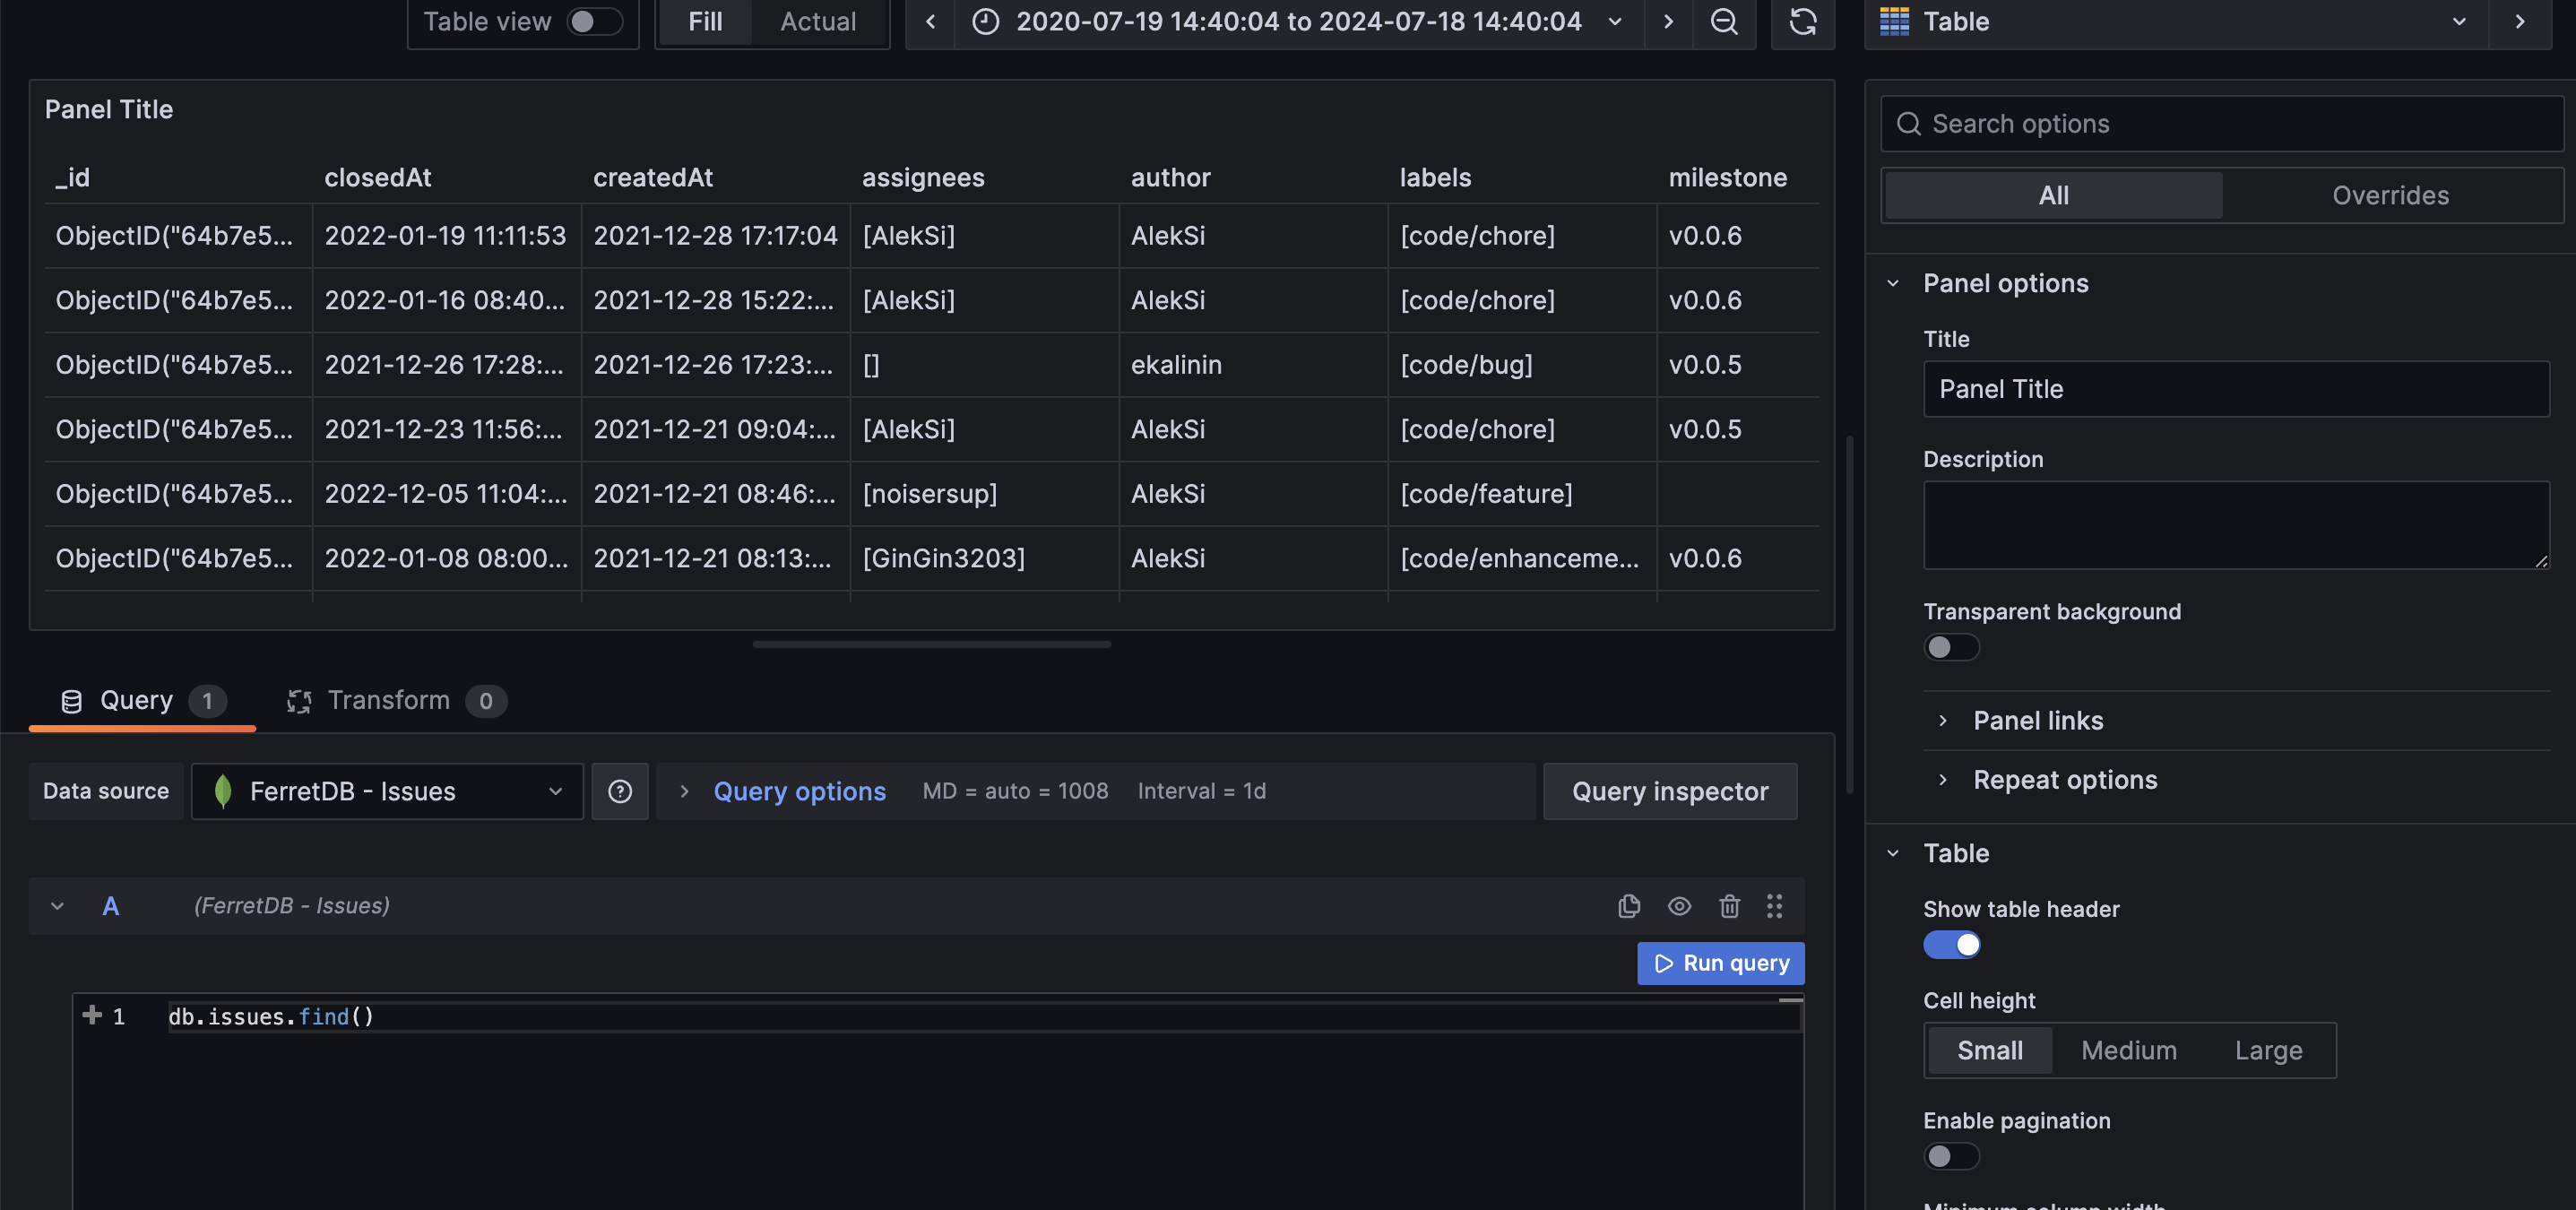 Grafana table view of database